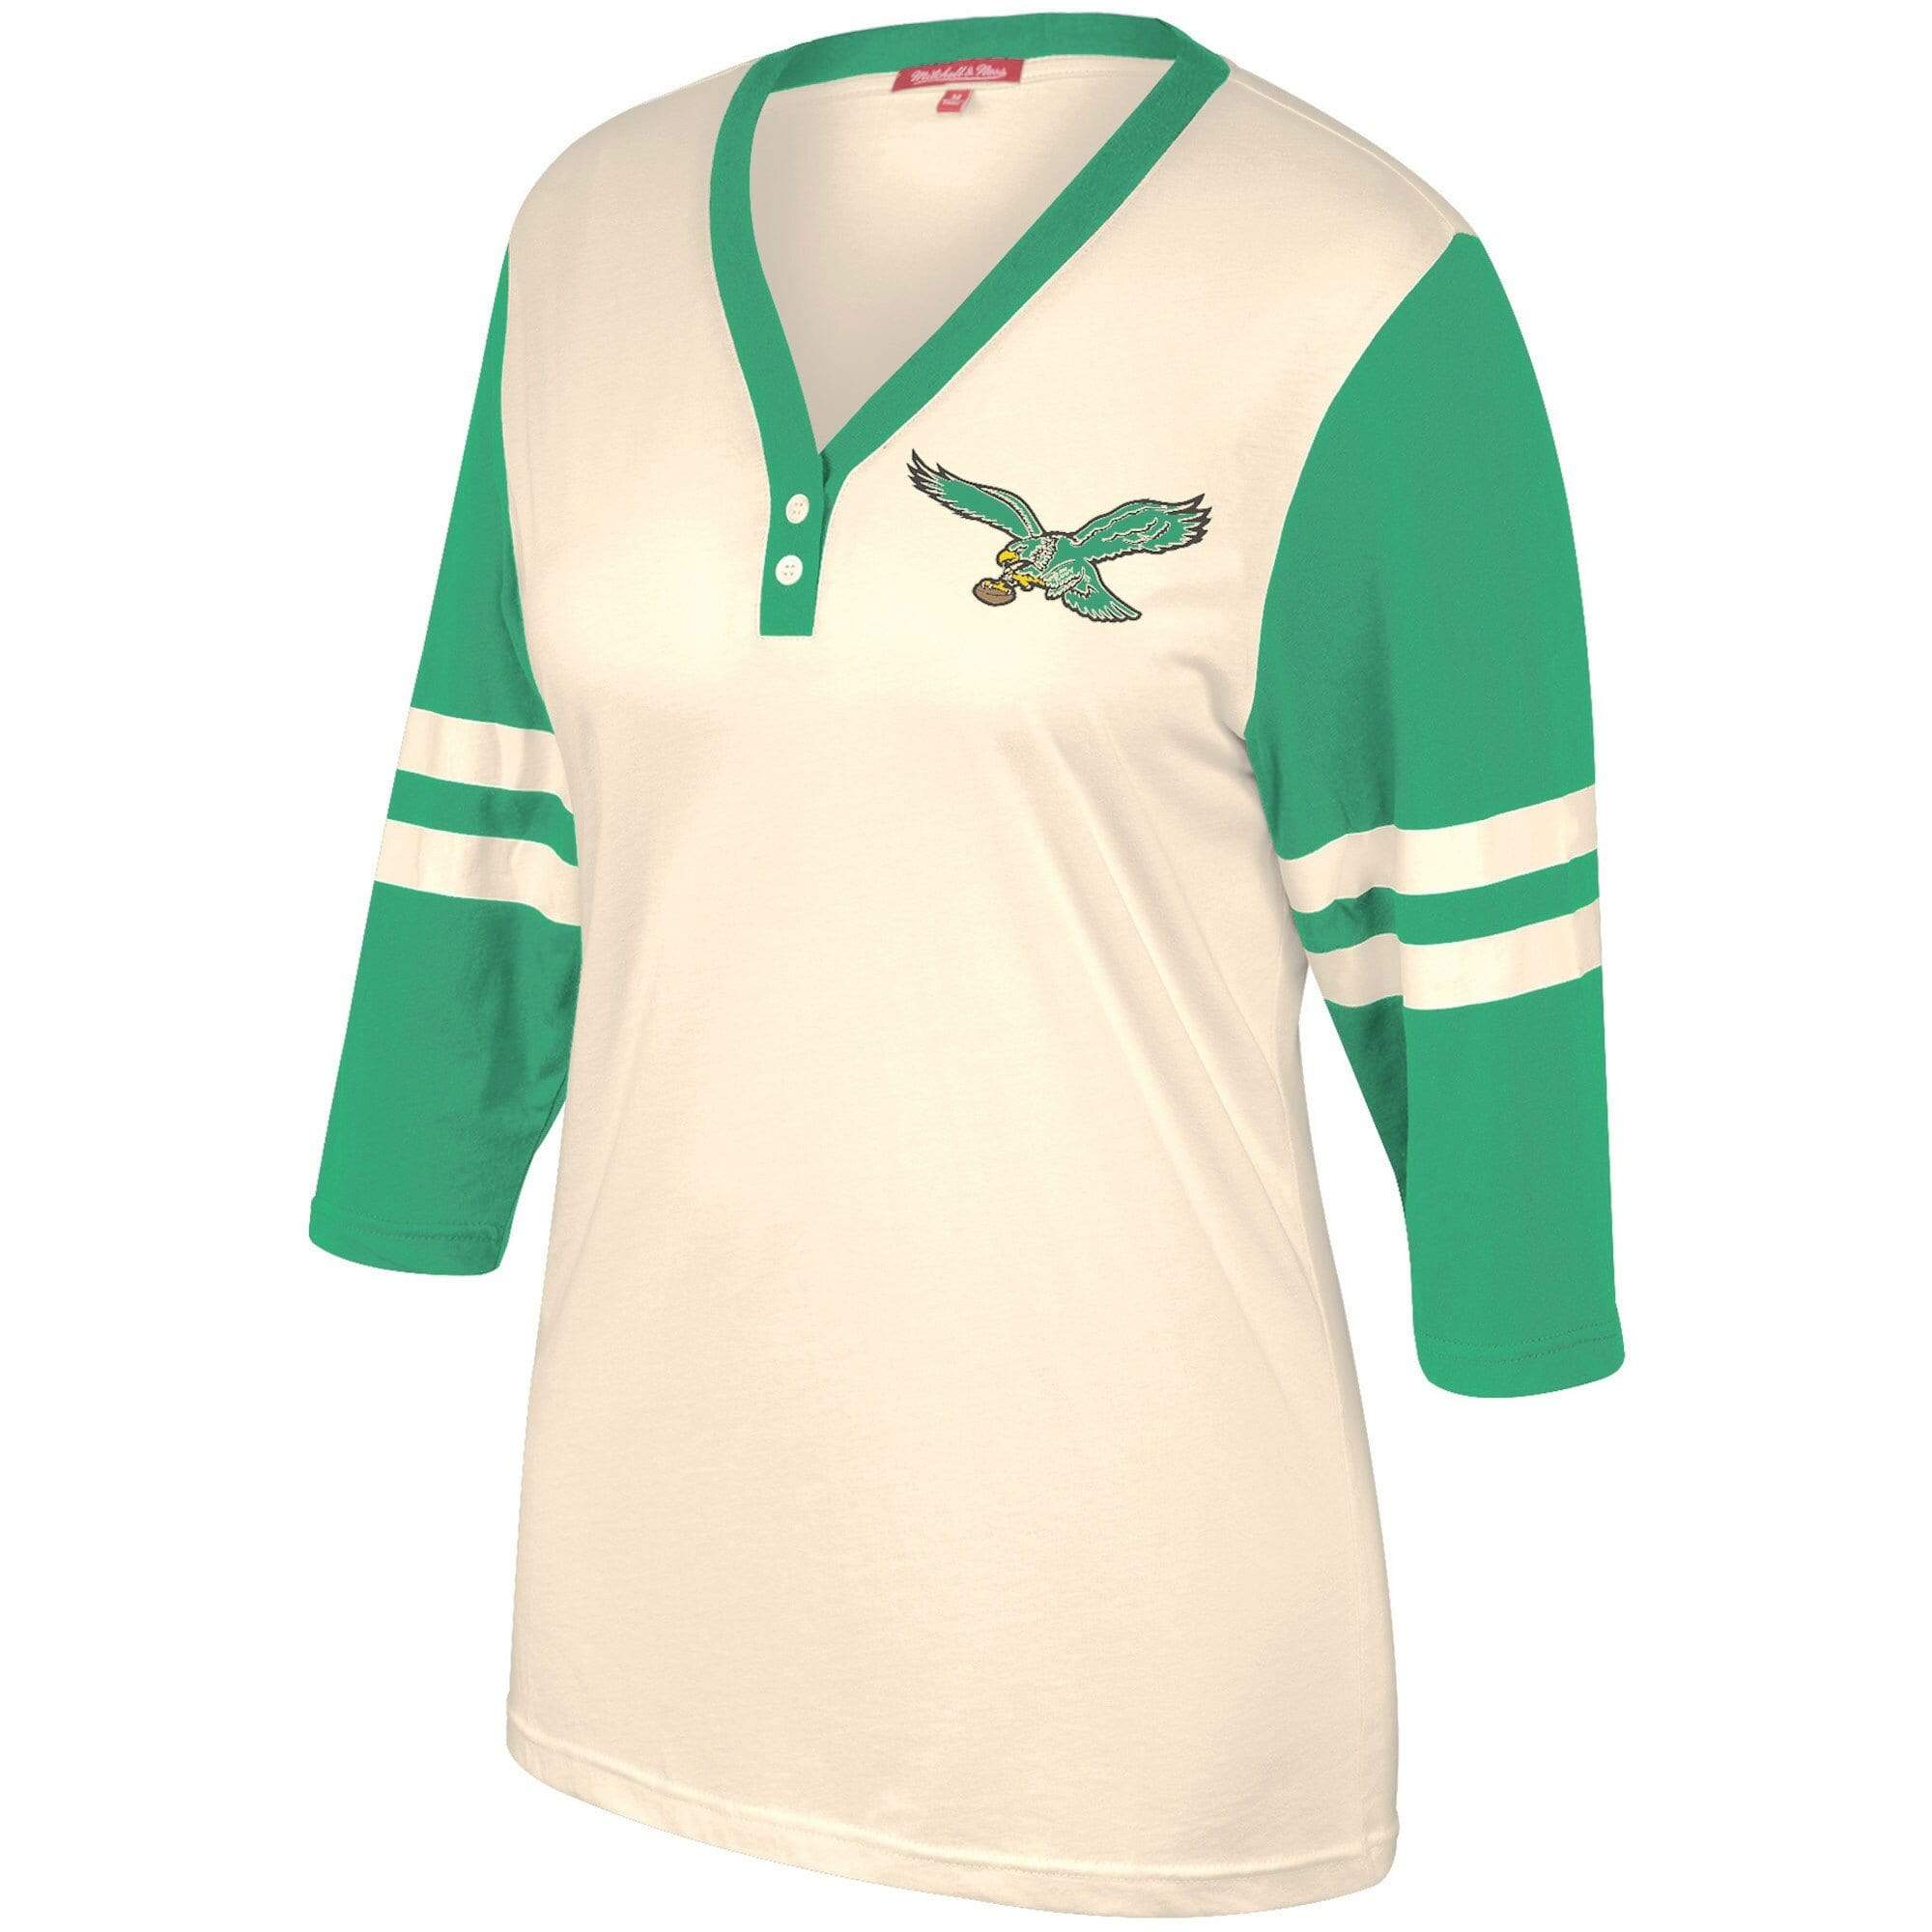  Cream Mitchell & Ness, Women's Eagles Shoot Out Tee (White and Green)